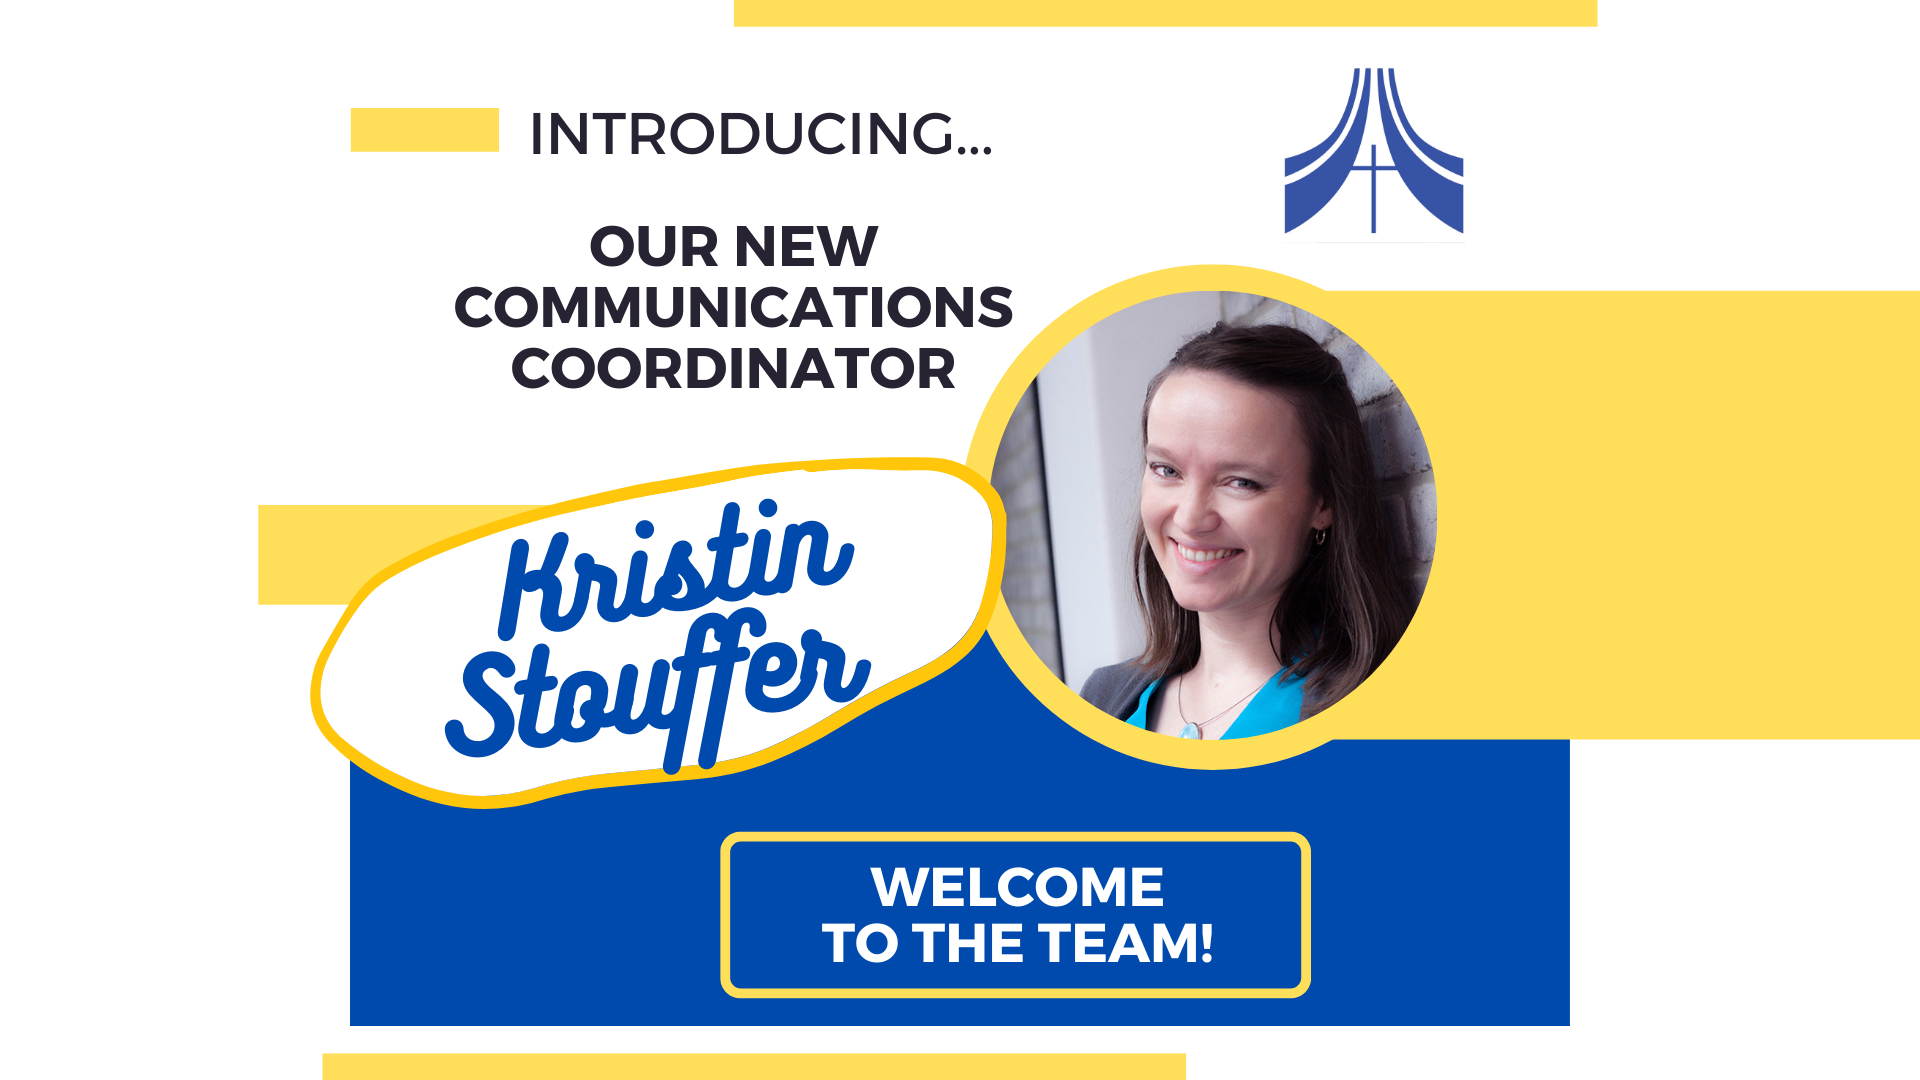 Announcing our new Communications Coordinator, Kristin Stouffer!